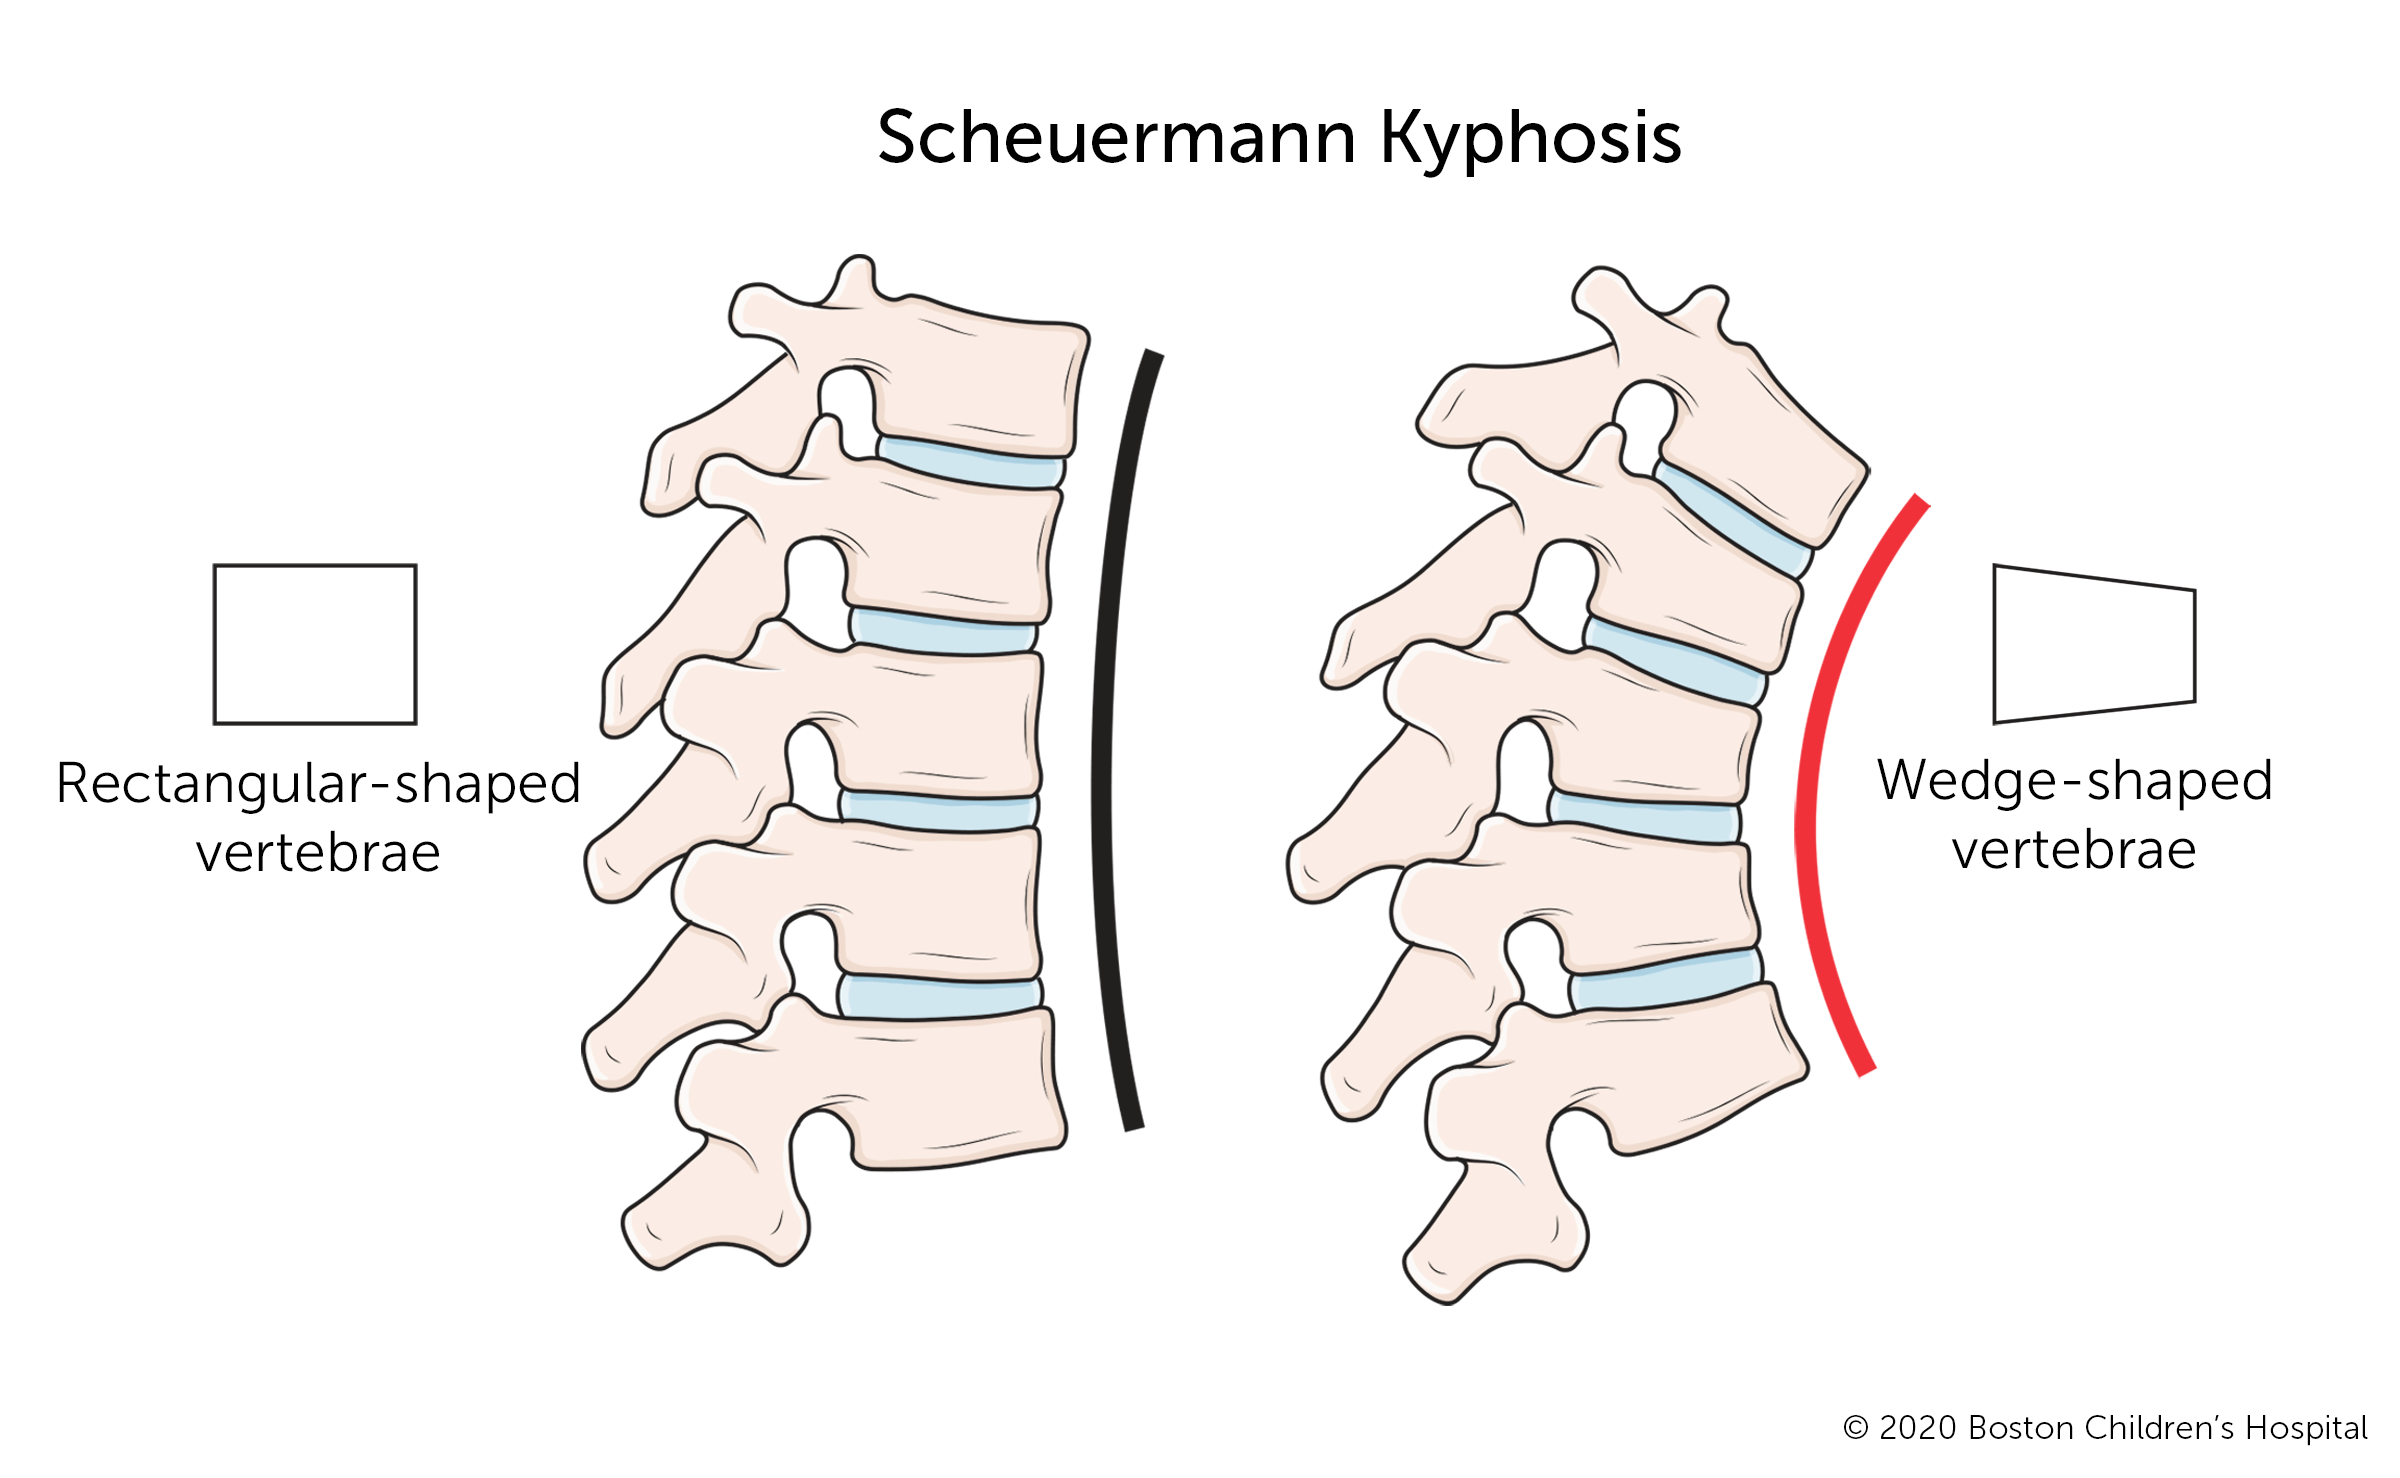 Scheuermann’s, or juvenile, kyphosis is a structural abnormality that occurs when several vertebrae in the thoracic spine develop a triangular (rather than rectangular) shape.